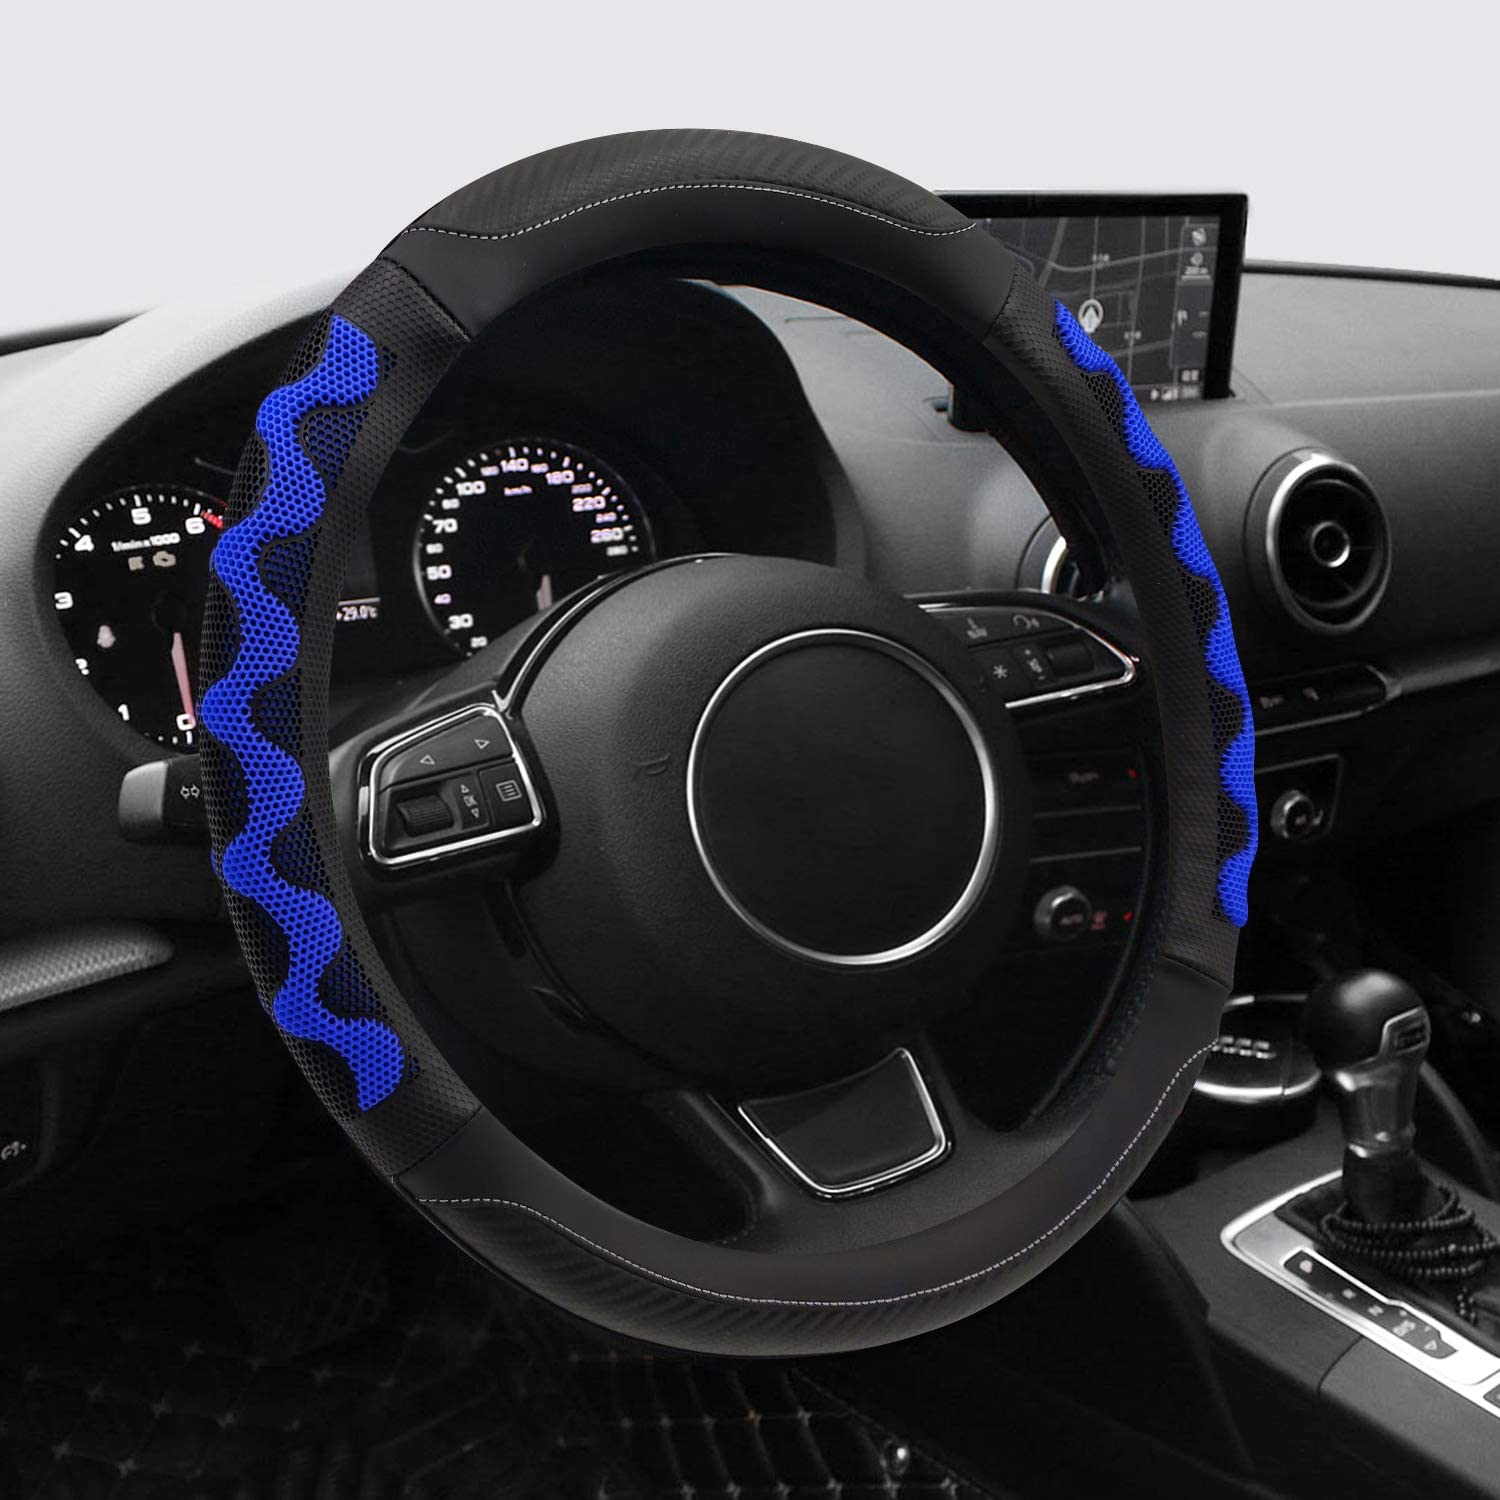 Universal Fit Leather Steering Wheel Cover with Blue Sport Grip,